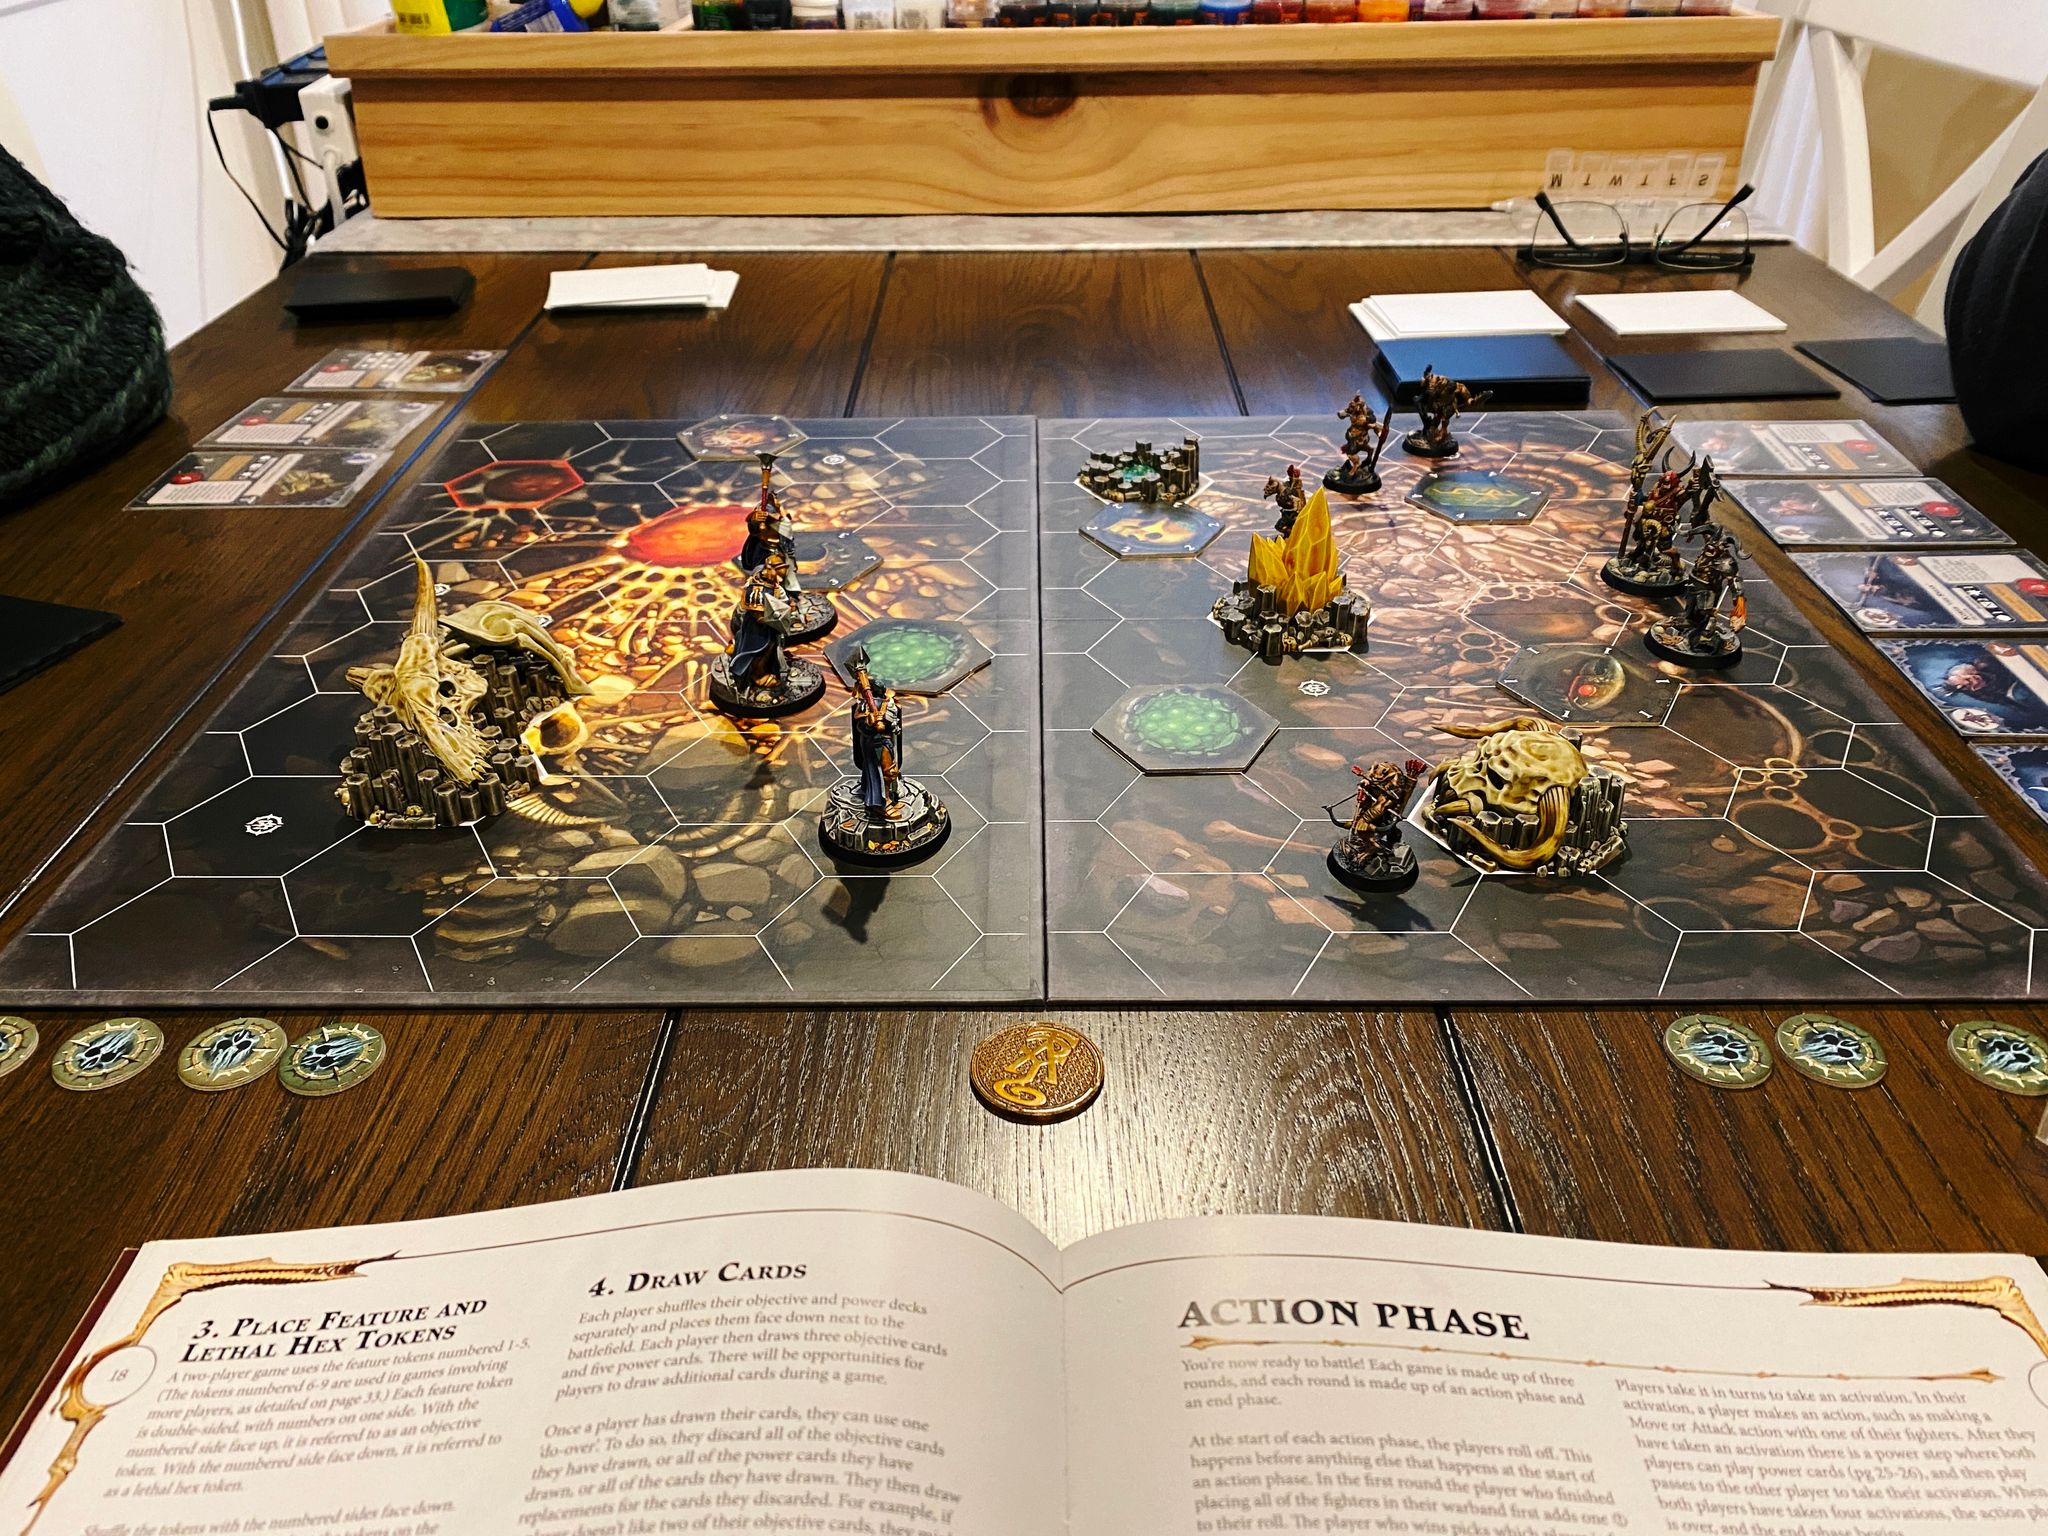 A photo of the board of a Warhammer Underworlds game. The board has hexagonal tiles printed on it, and there's six goat-looking beastmen on the right side (Grashrak's Despoilers) and three heavily-armoured warriors in gold and dark blue armour on the left (Ironsoul's Condemnors).